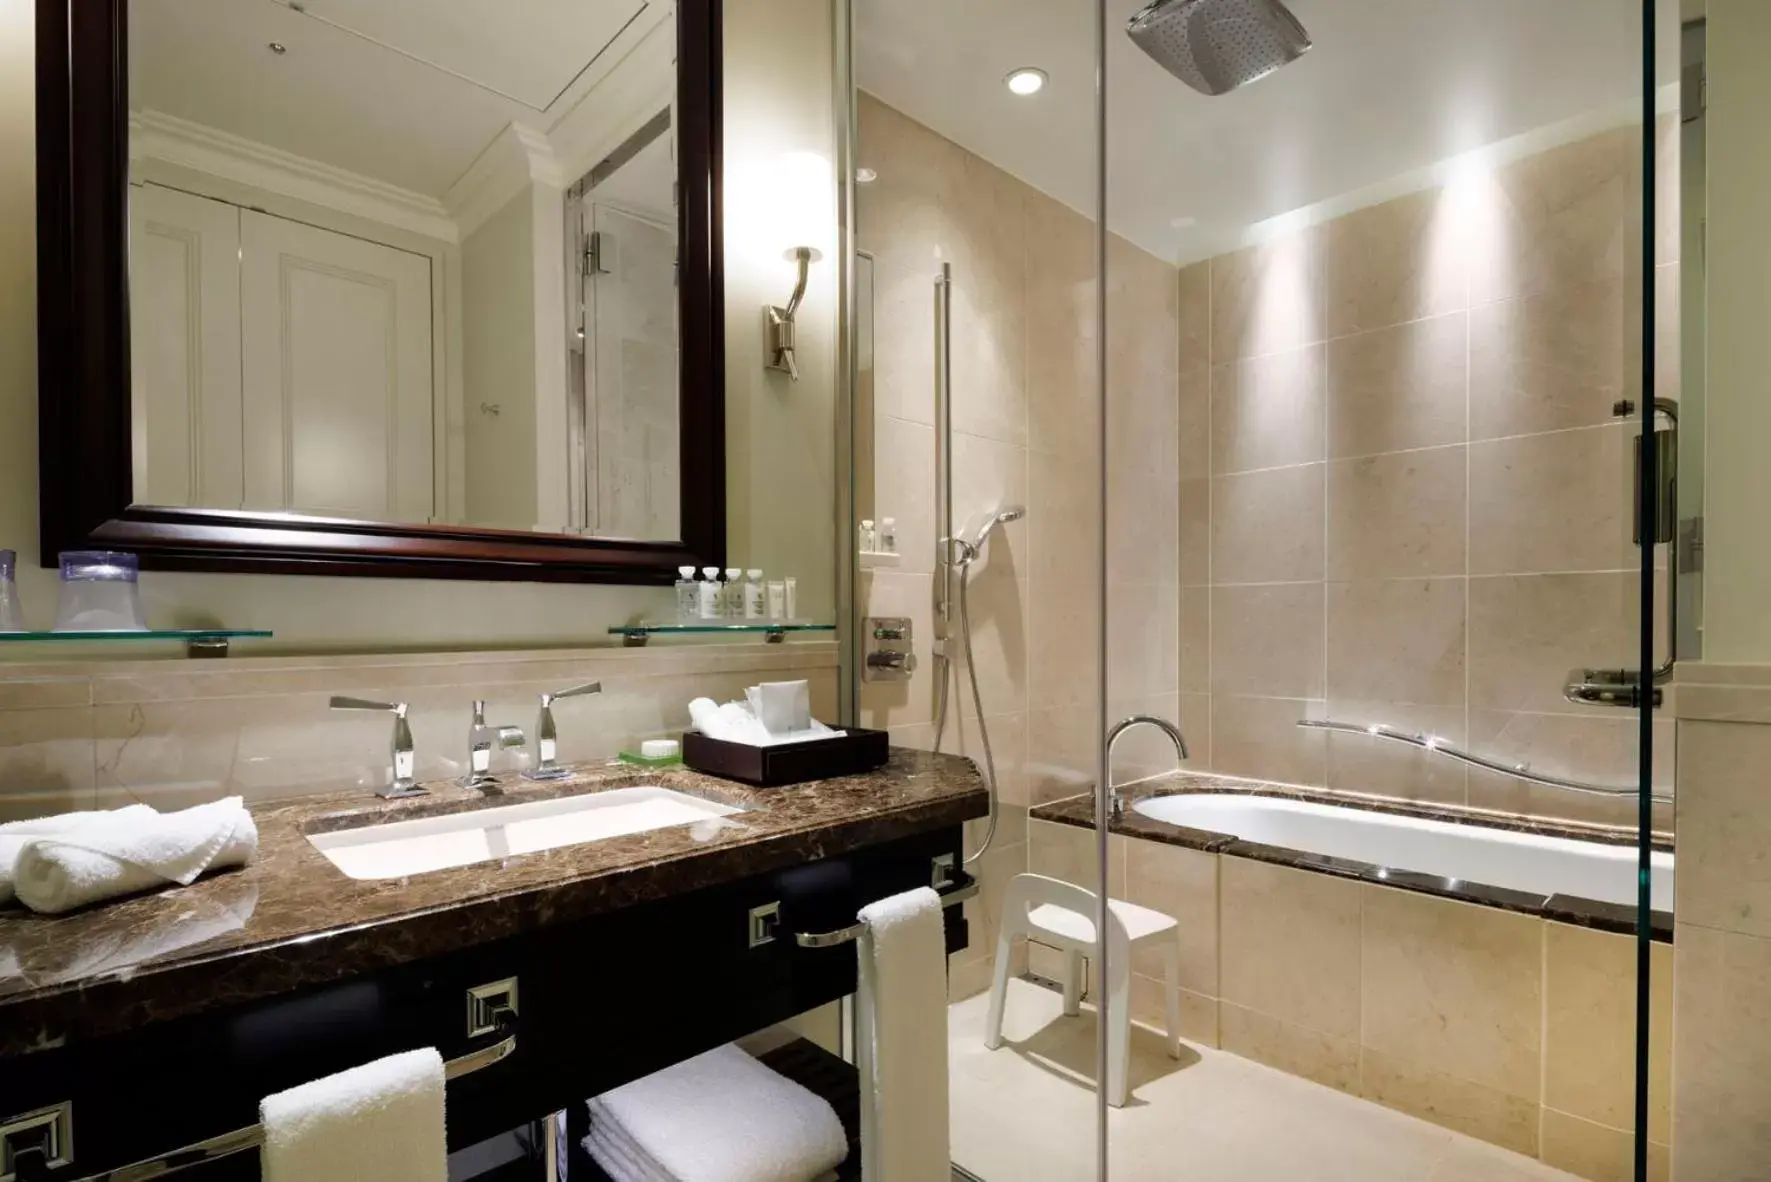 Bathroom in The Tokyo Station Hotel